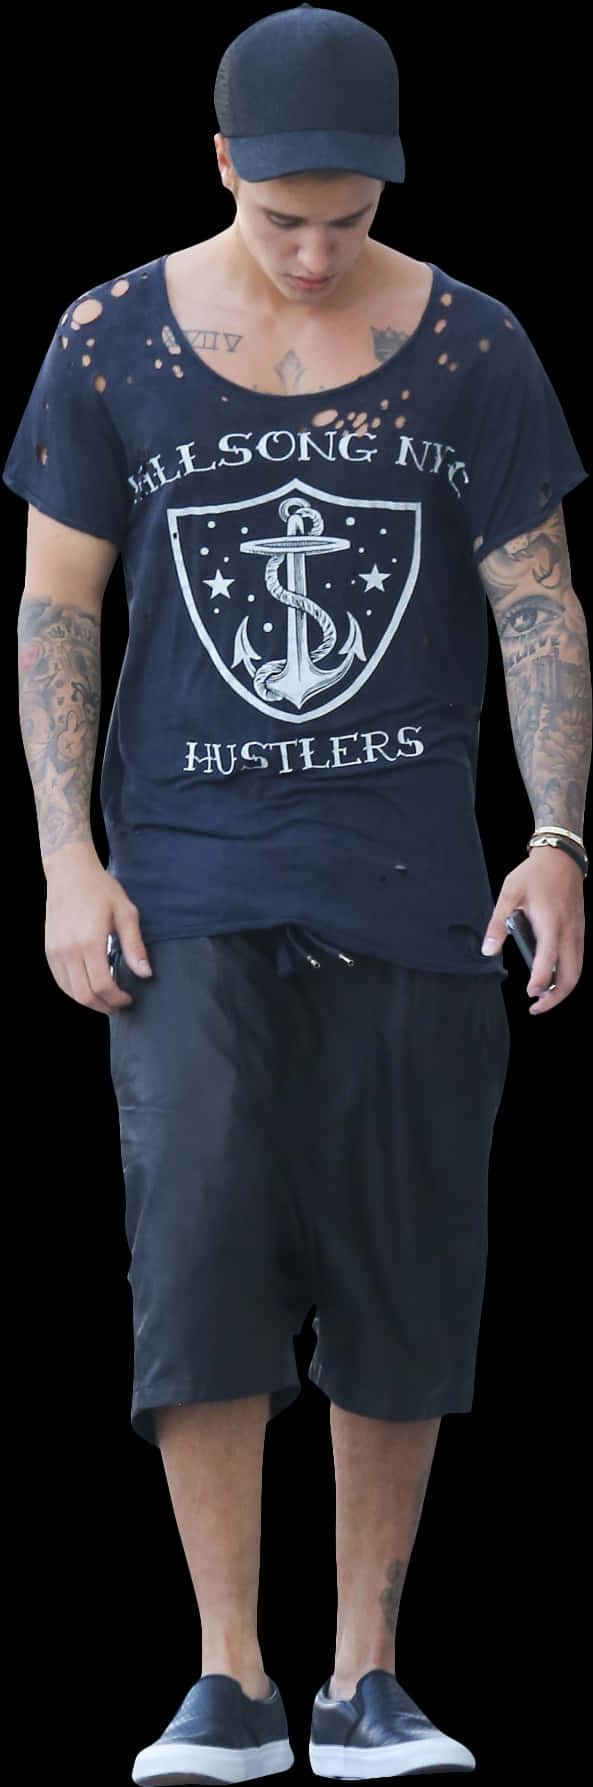 A Man With Tattoos On His Arm